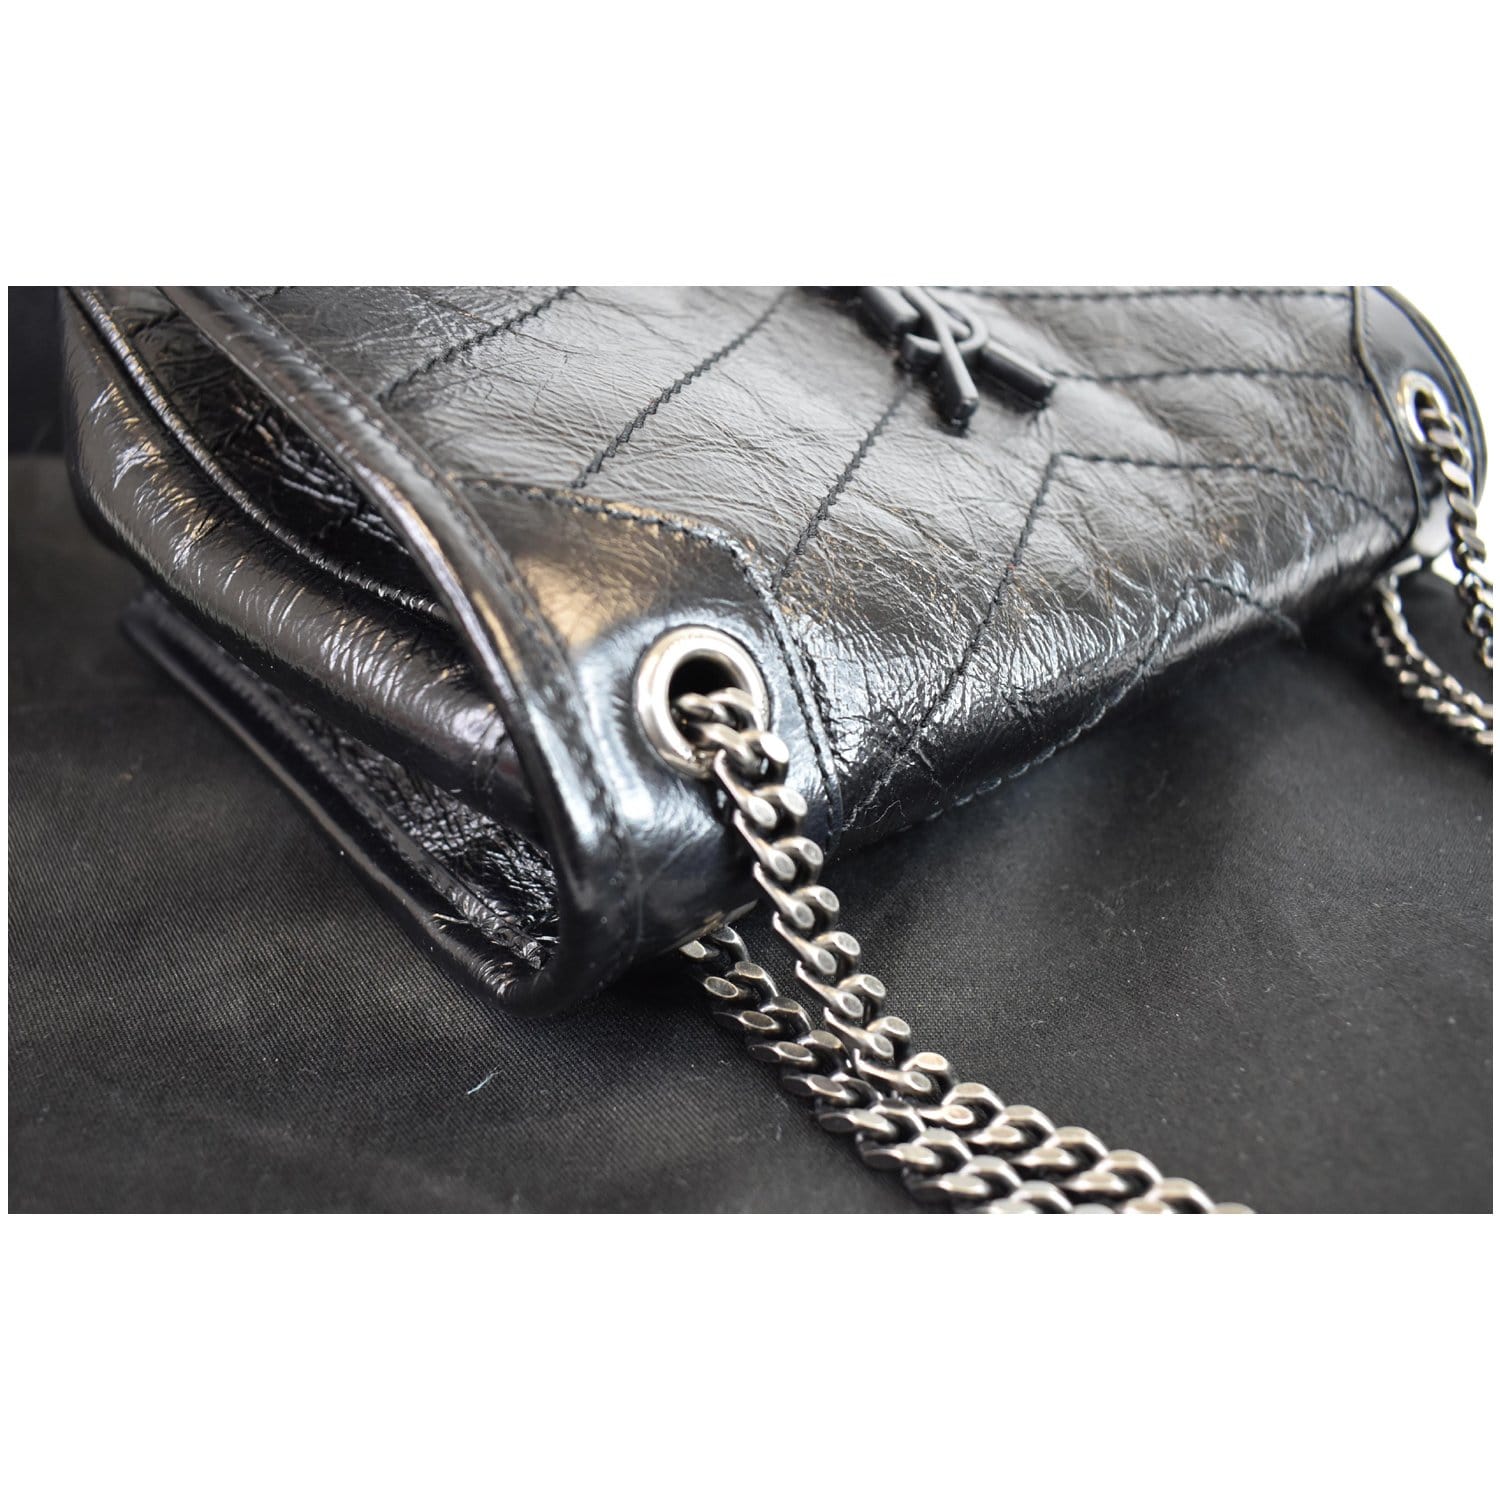 CHANEL 19 Flap Coin Purse Quilted Goatskin Chain Crossbody